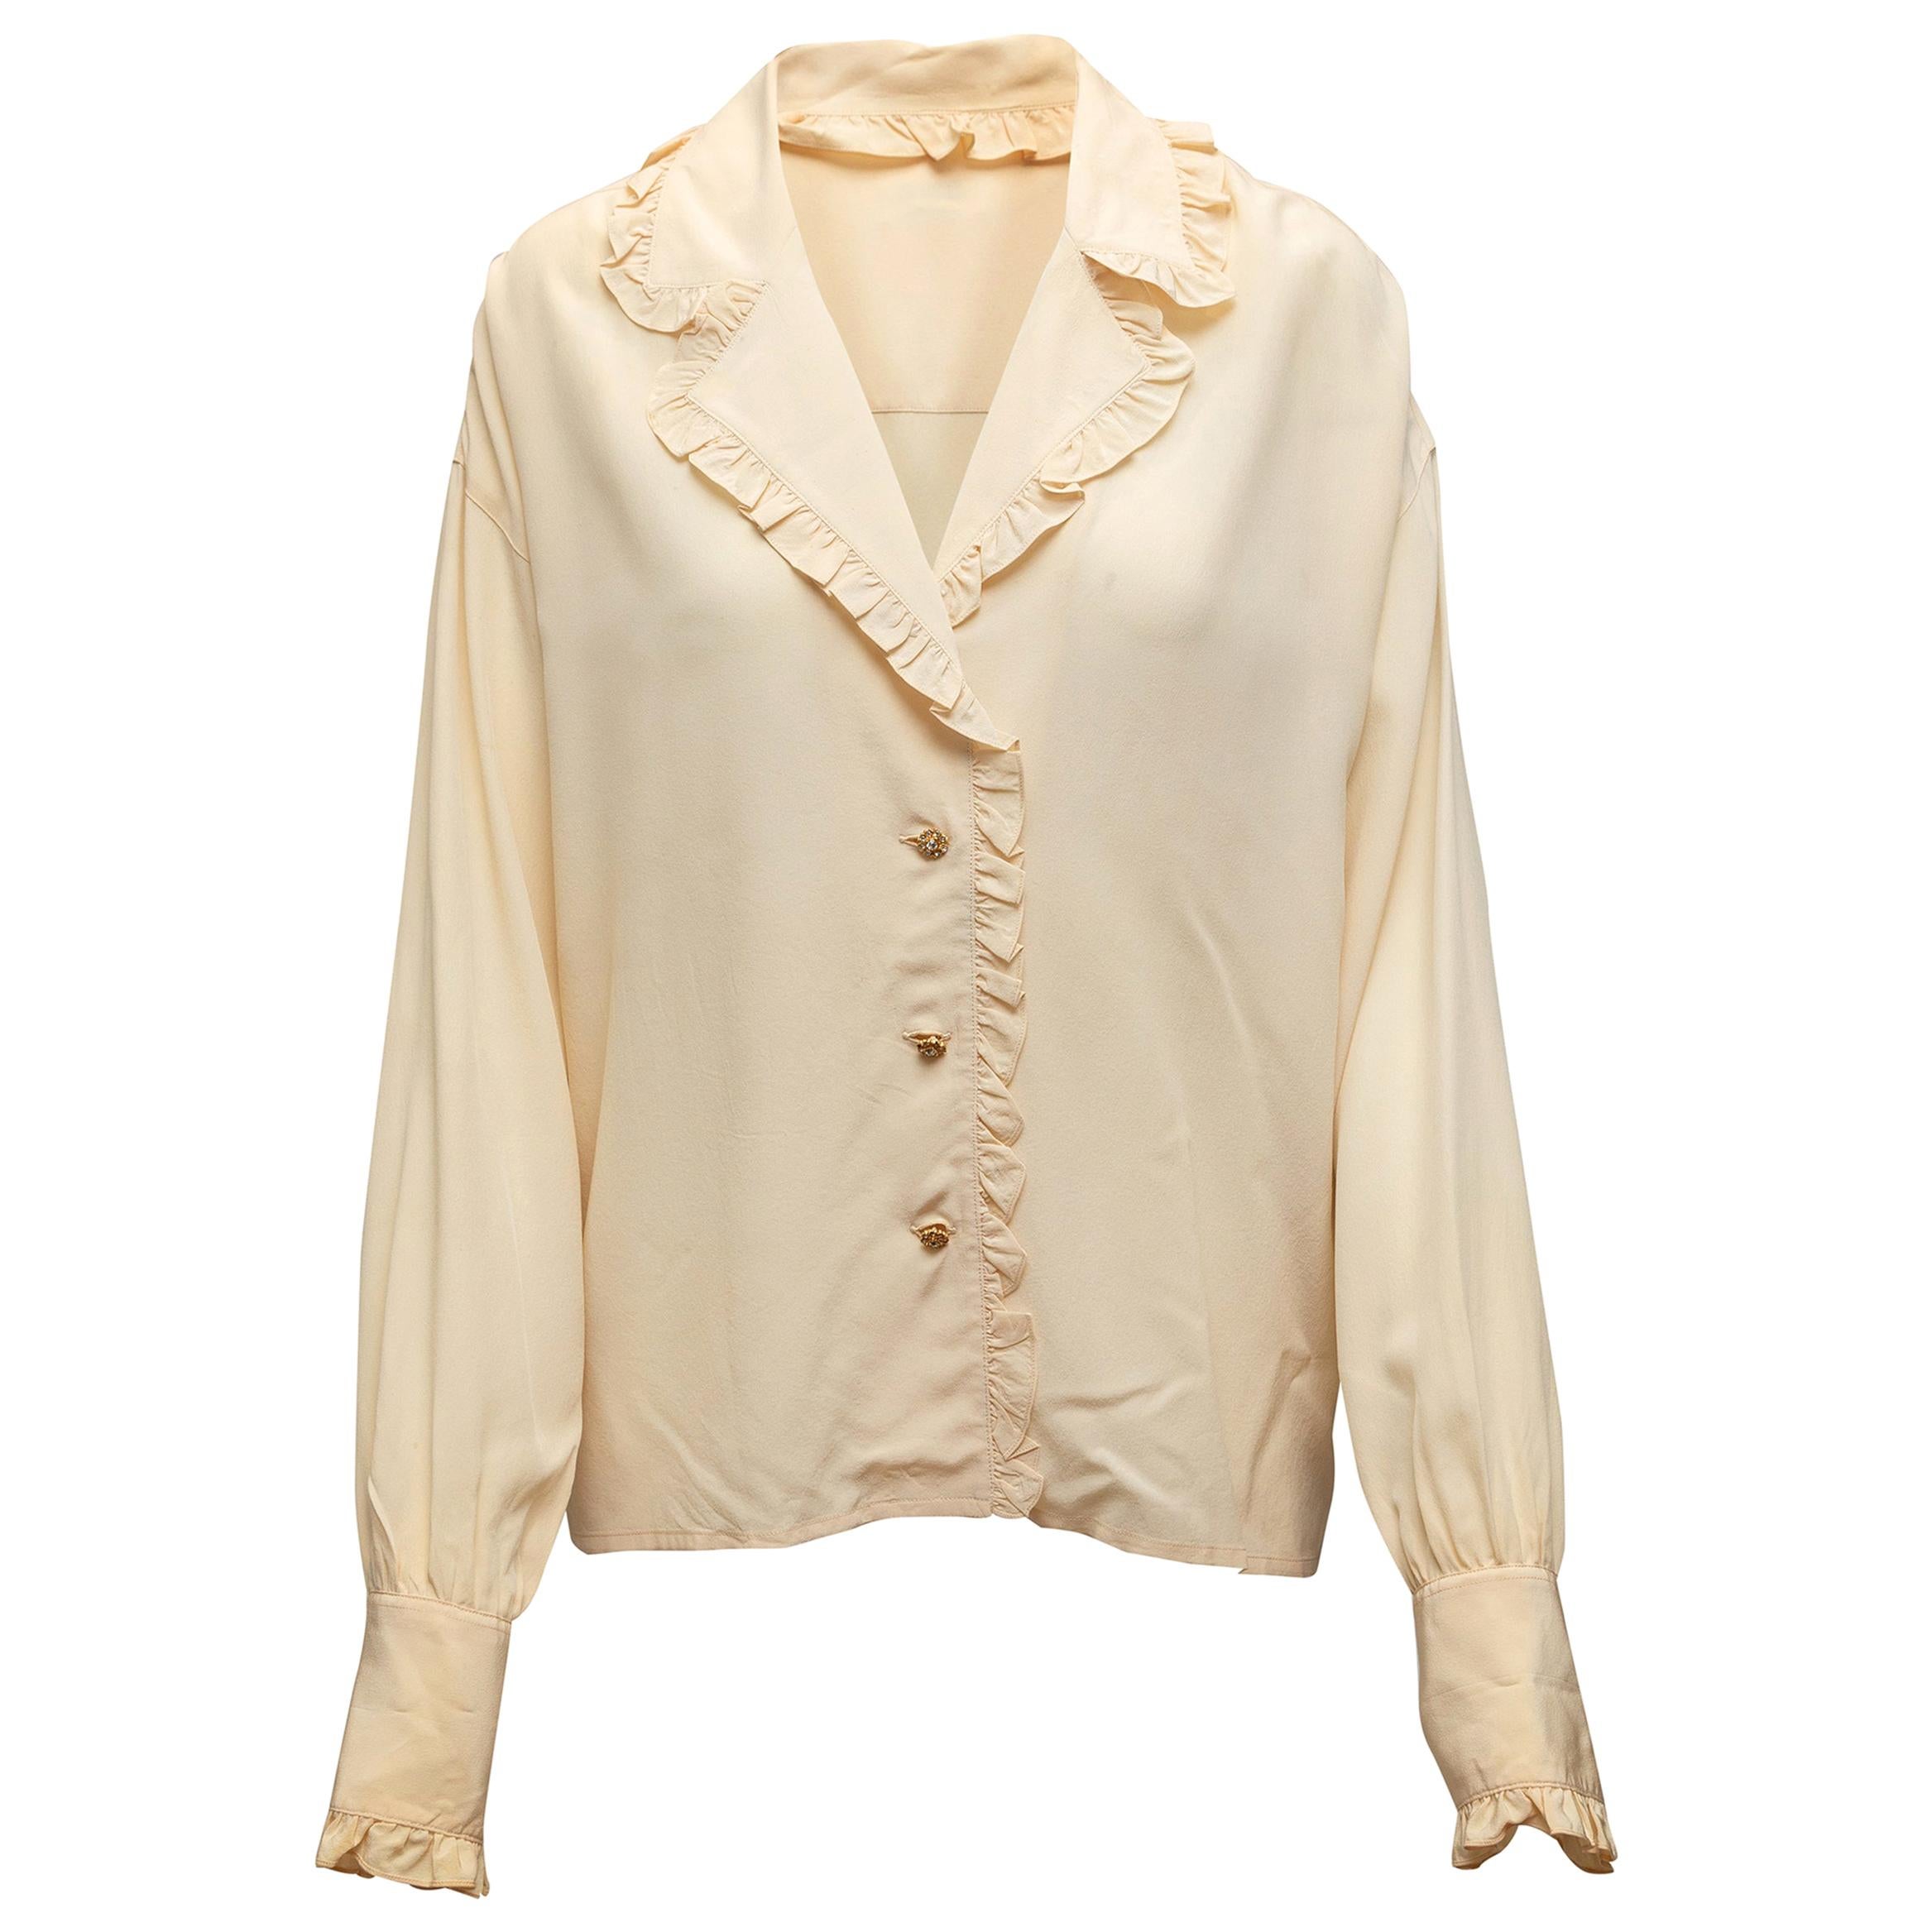 Chanel Cream Ruffle-Trimmed Button-Up Blouse